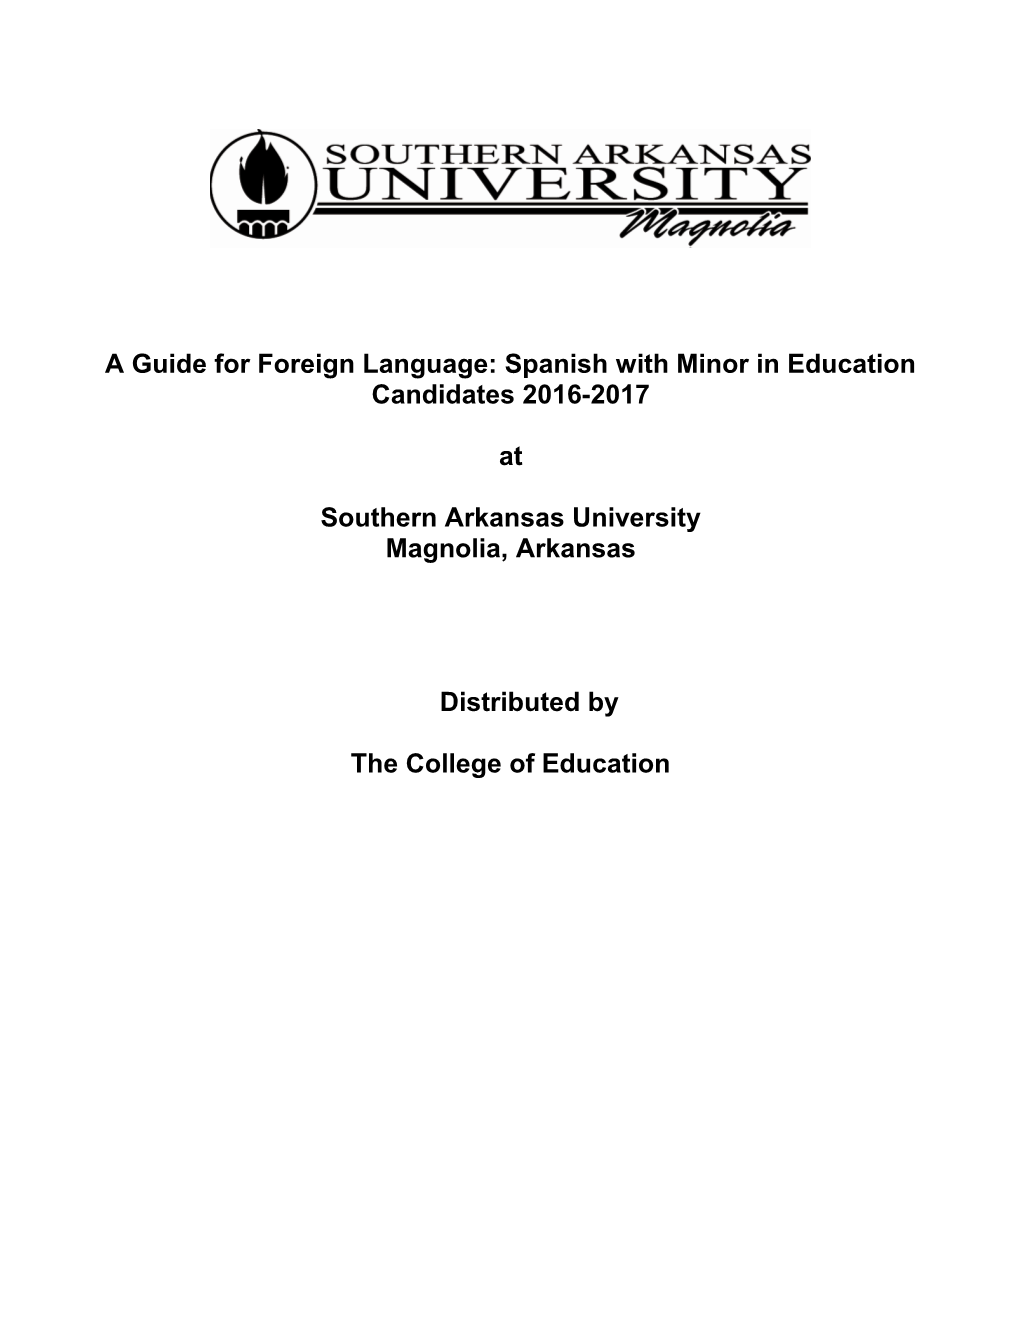 A Guide for Foreign Language: Spanish with Minor in Education